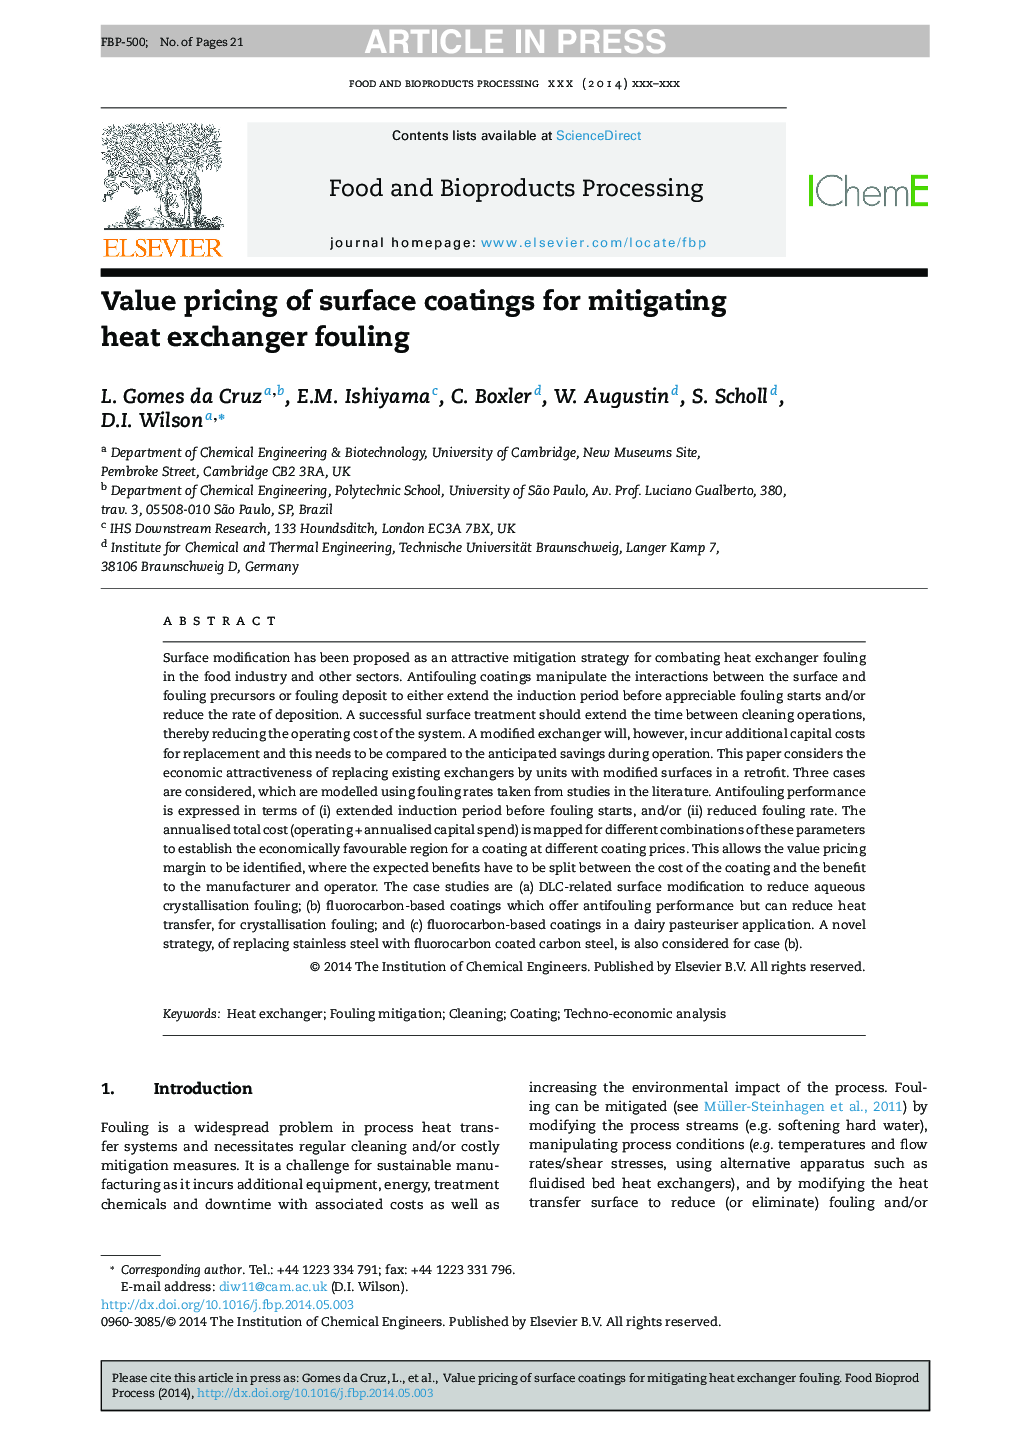 Value pricing of surface coatings for mitigating heat exchanger fouling